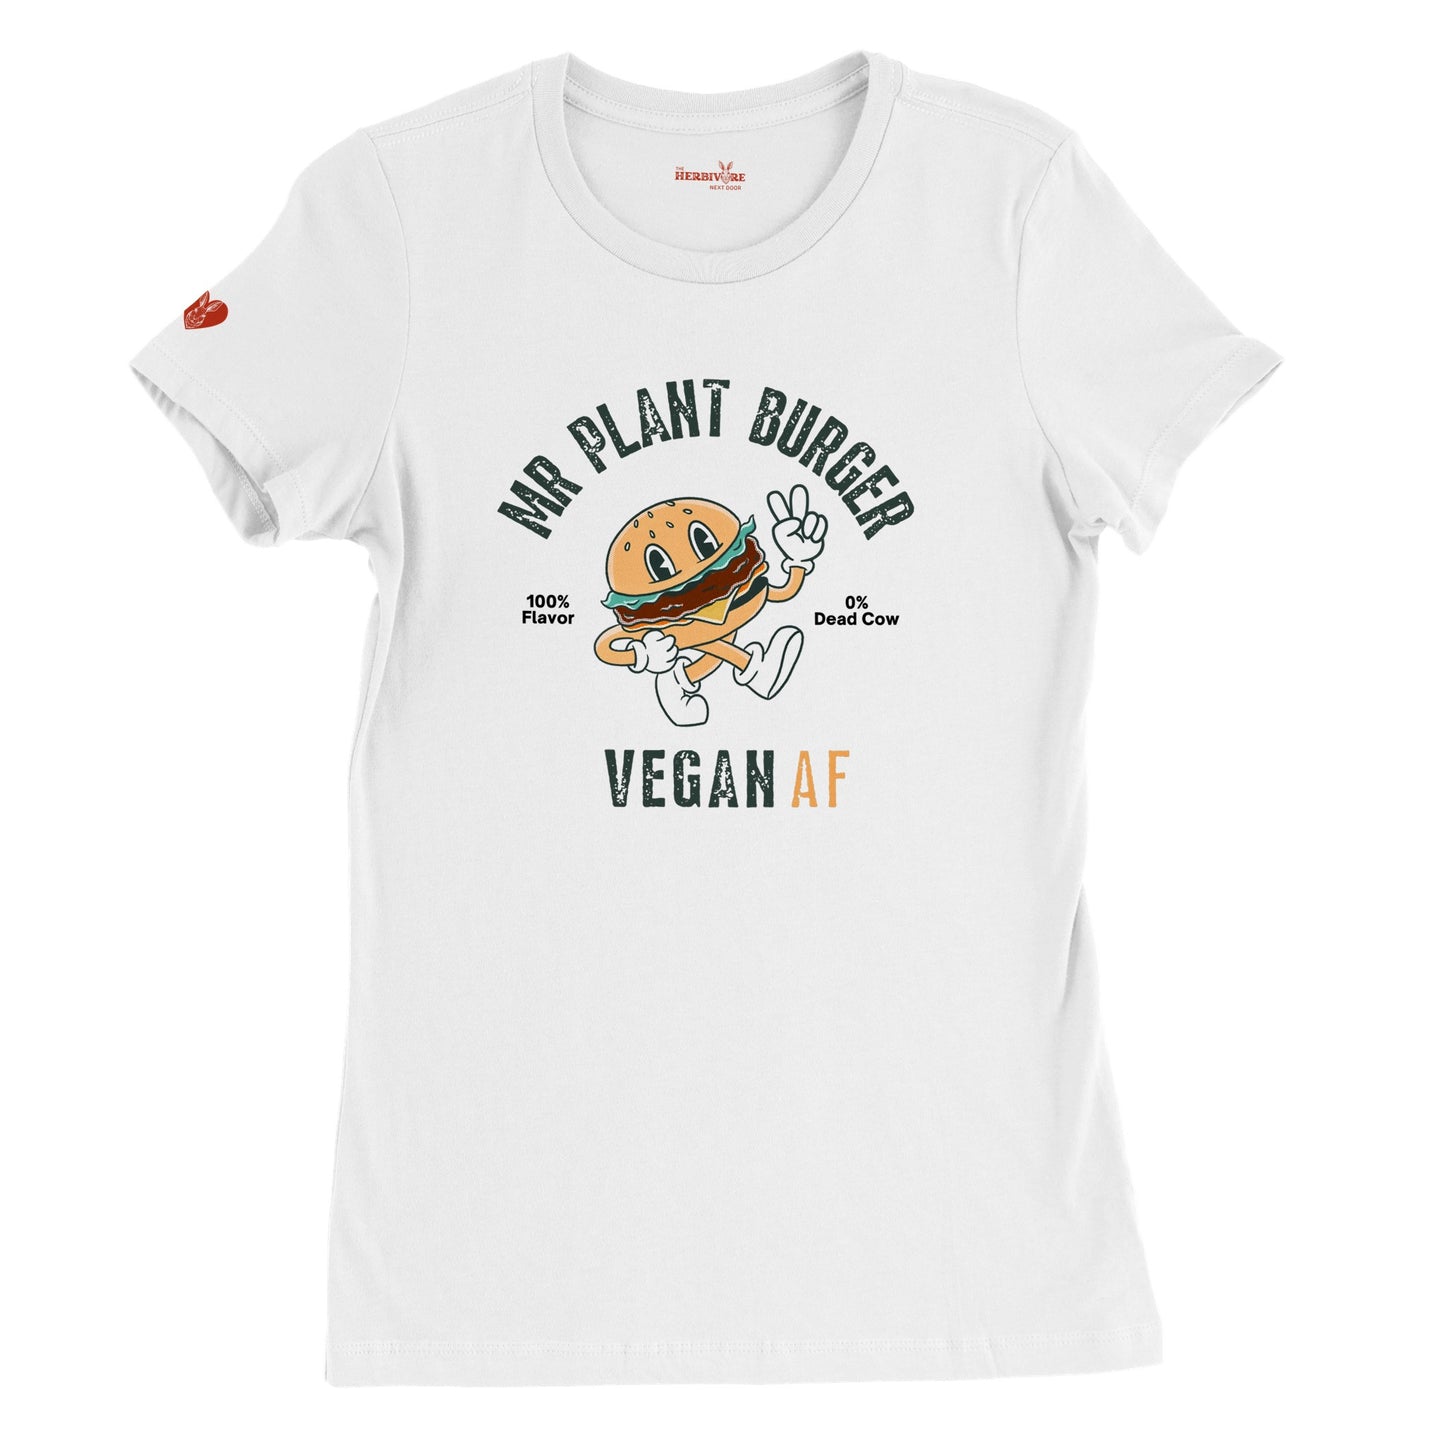 Mr Plant Burger - Womens Style (Women's run small - get one size up from normal unisex)